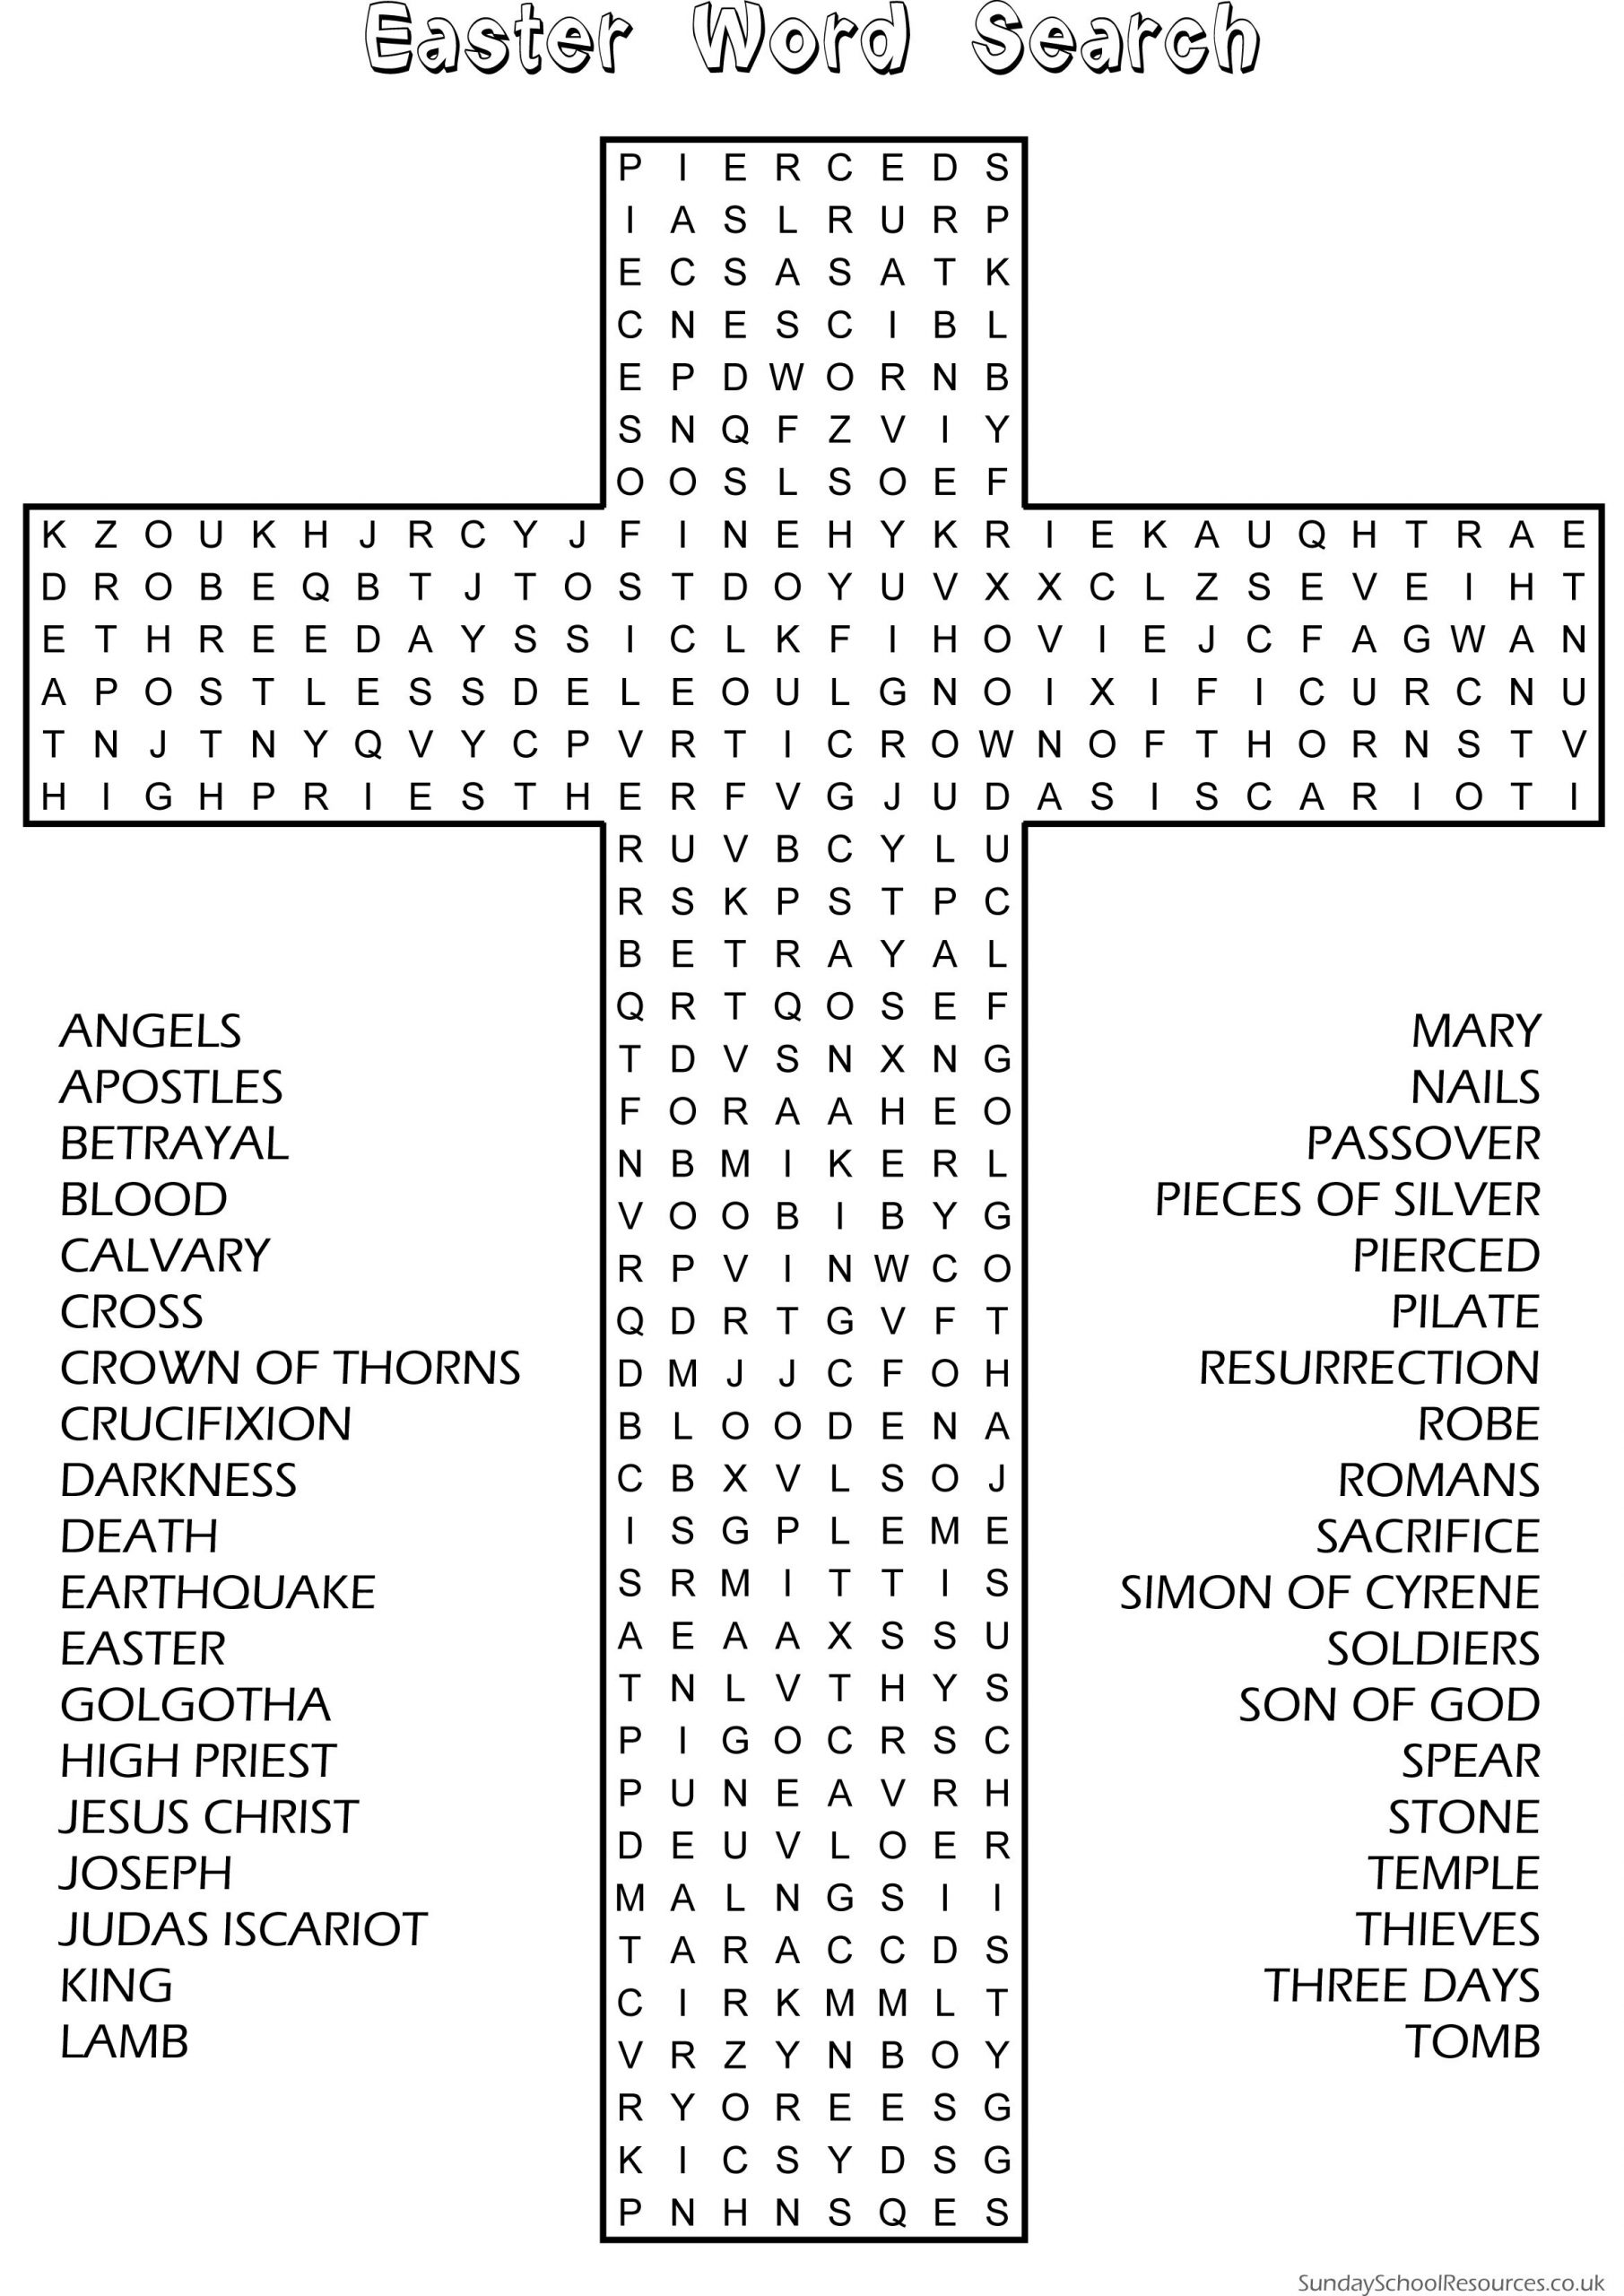 Easter Word Search - Sunday School Activity Website Has Good